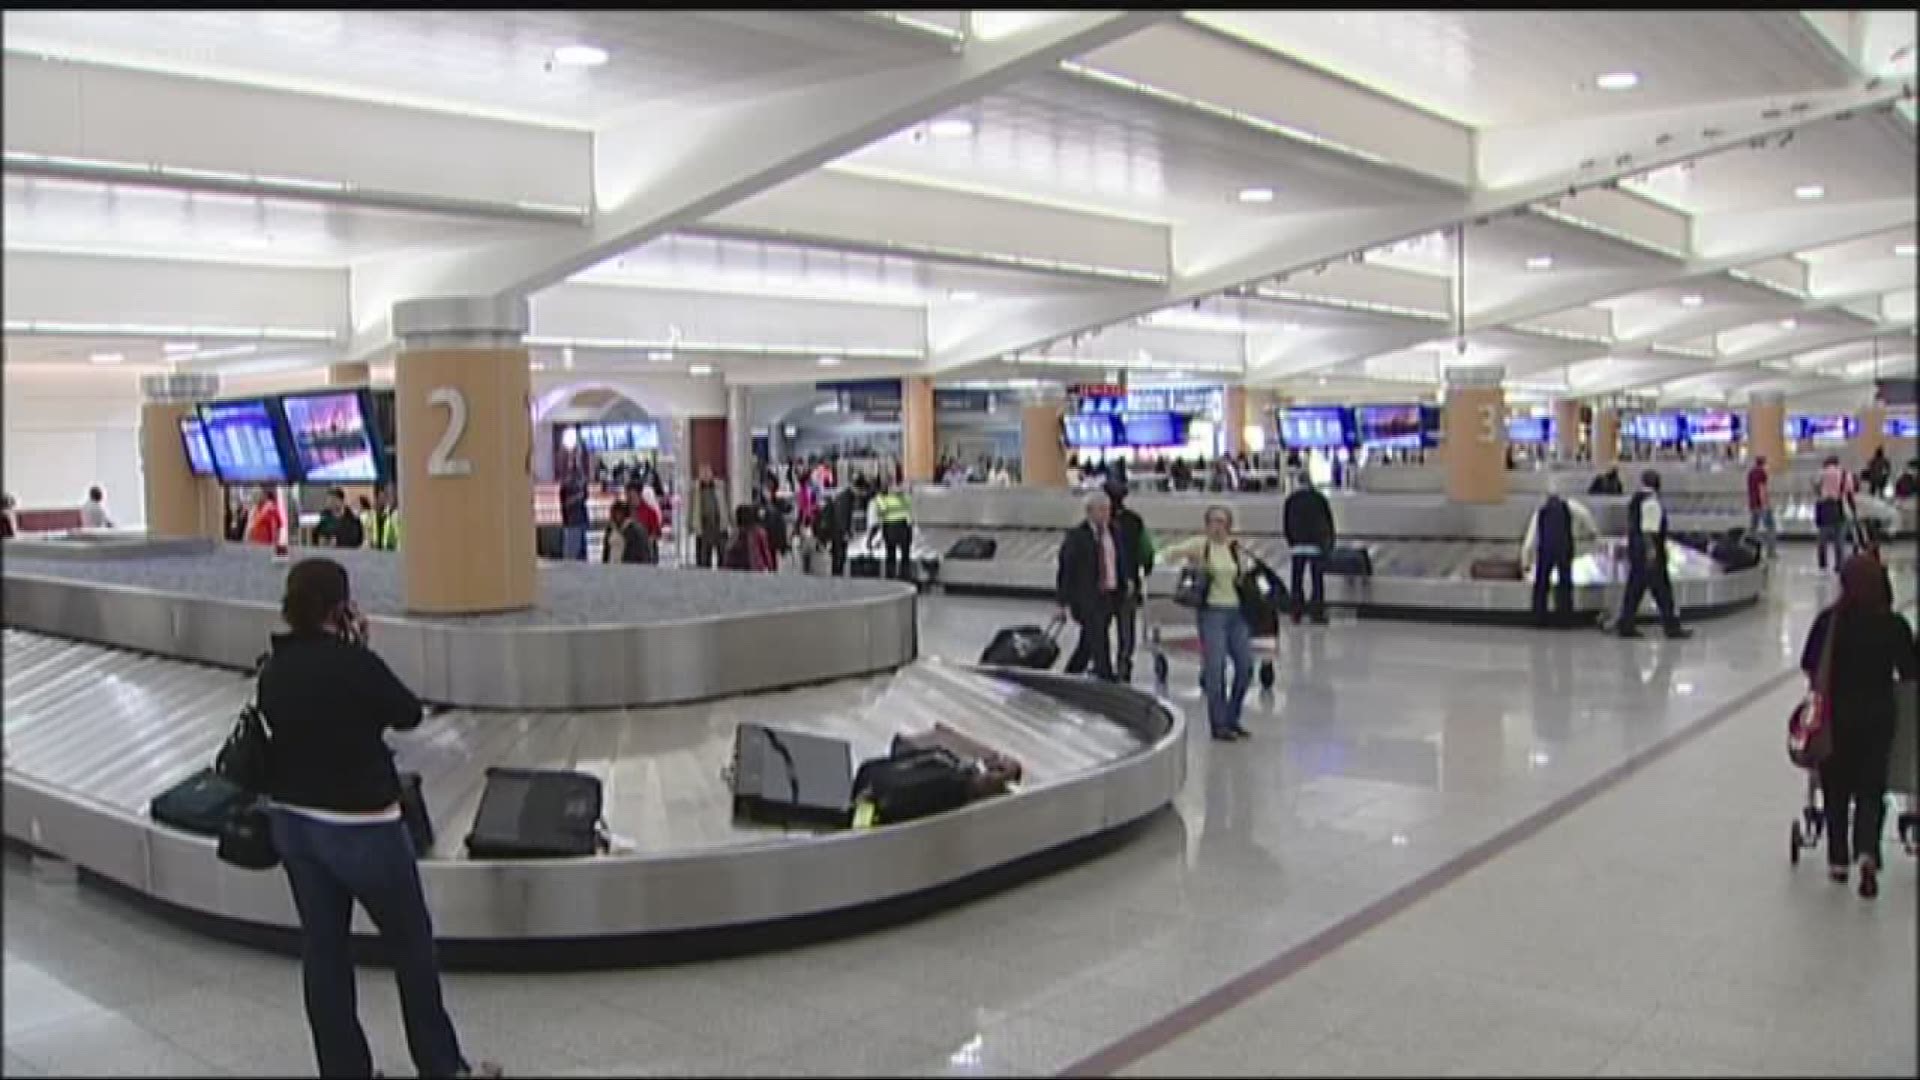 Earlier this month, all that started to change when the Airport closed its doors from 11 p.m. to 4:30 a.m. to all but ticketed passengers and their parties; airport personnel and construction crews.